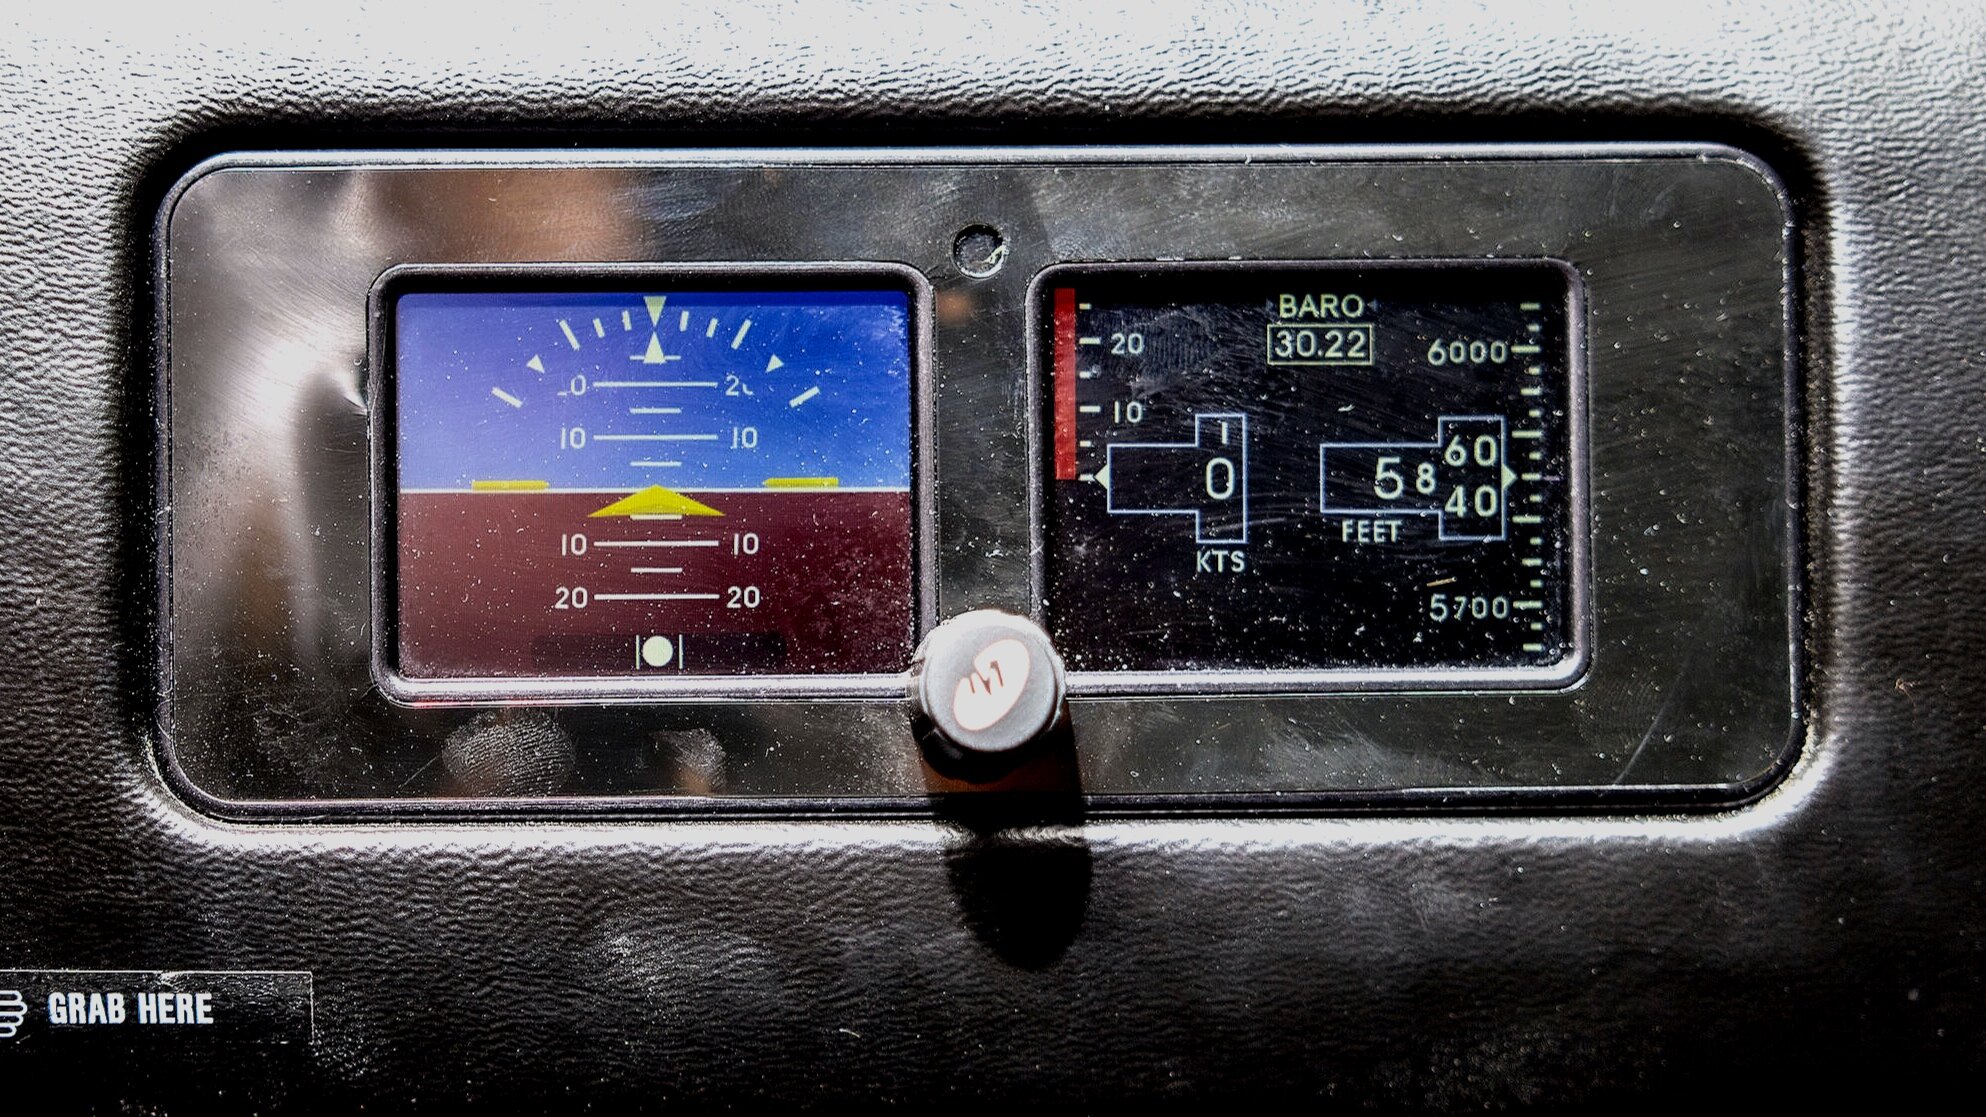 N828DZ | Just in case. Digital Standby instruments provide attitude, turn coordinator, airspeed, and altimeter information.